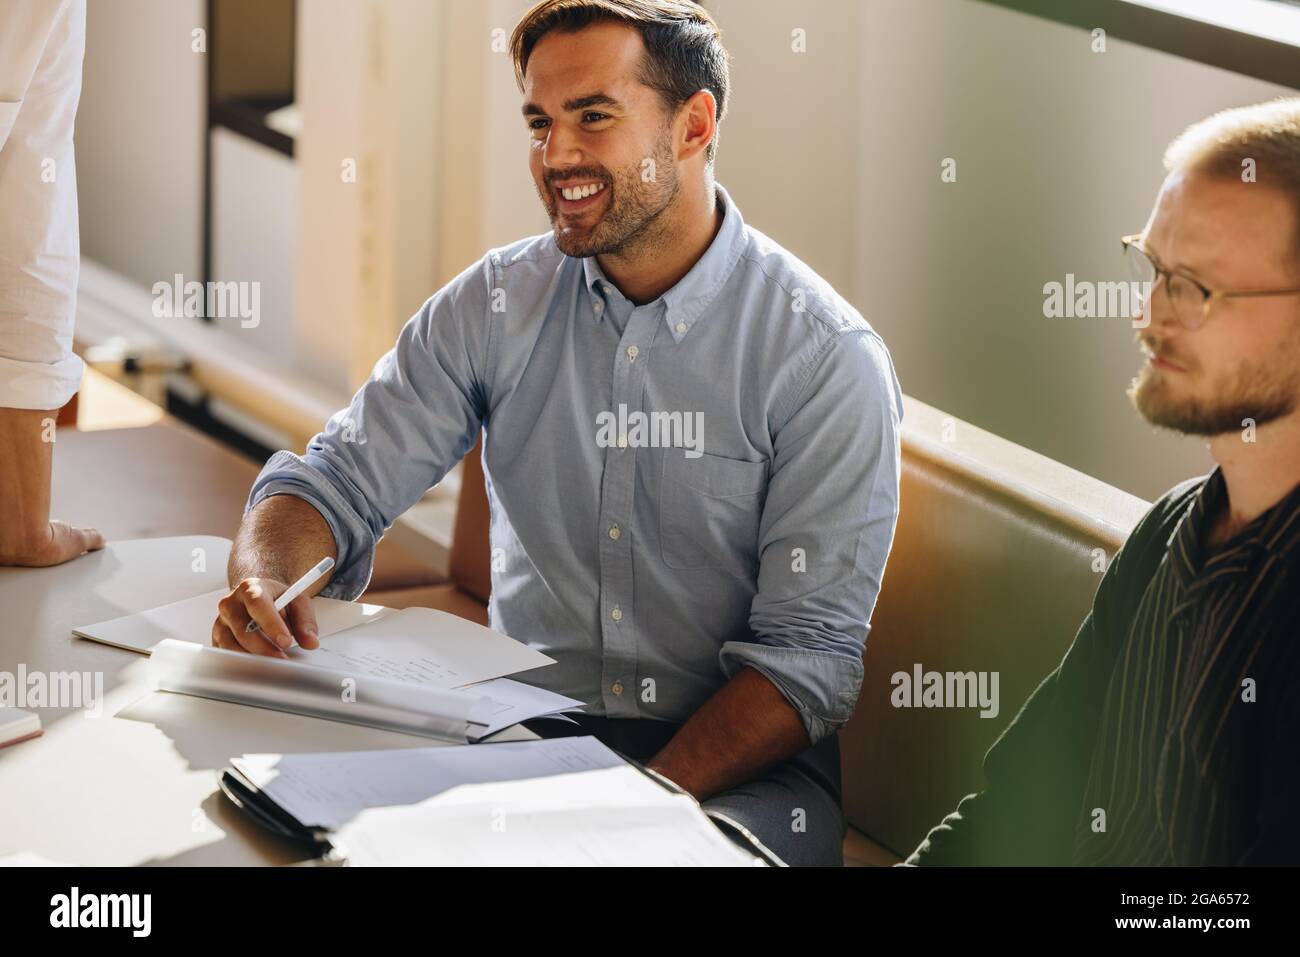 Male executive sitting in meeting. Young man paying attention to the discussion in brainstorming session at startup. Stock Photo